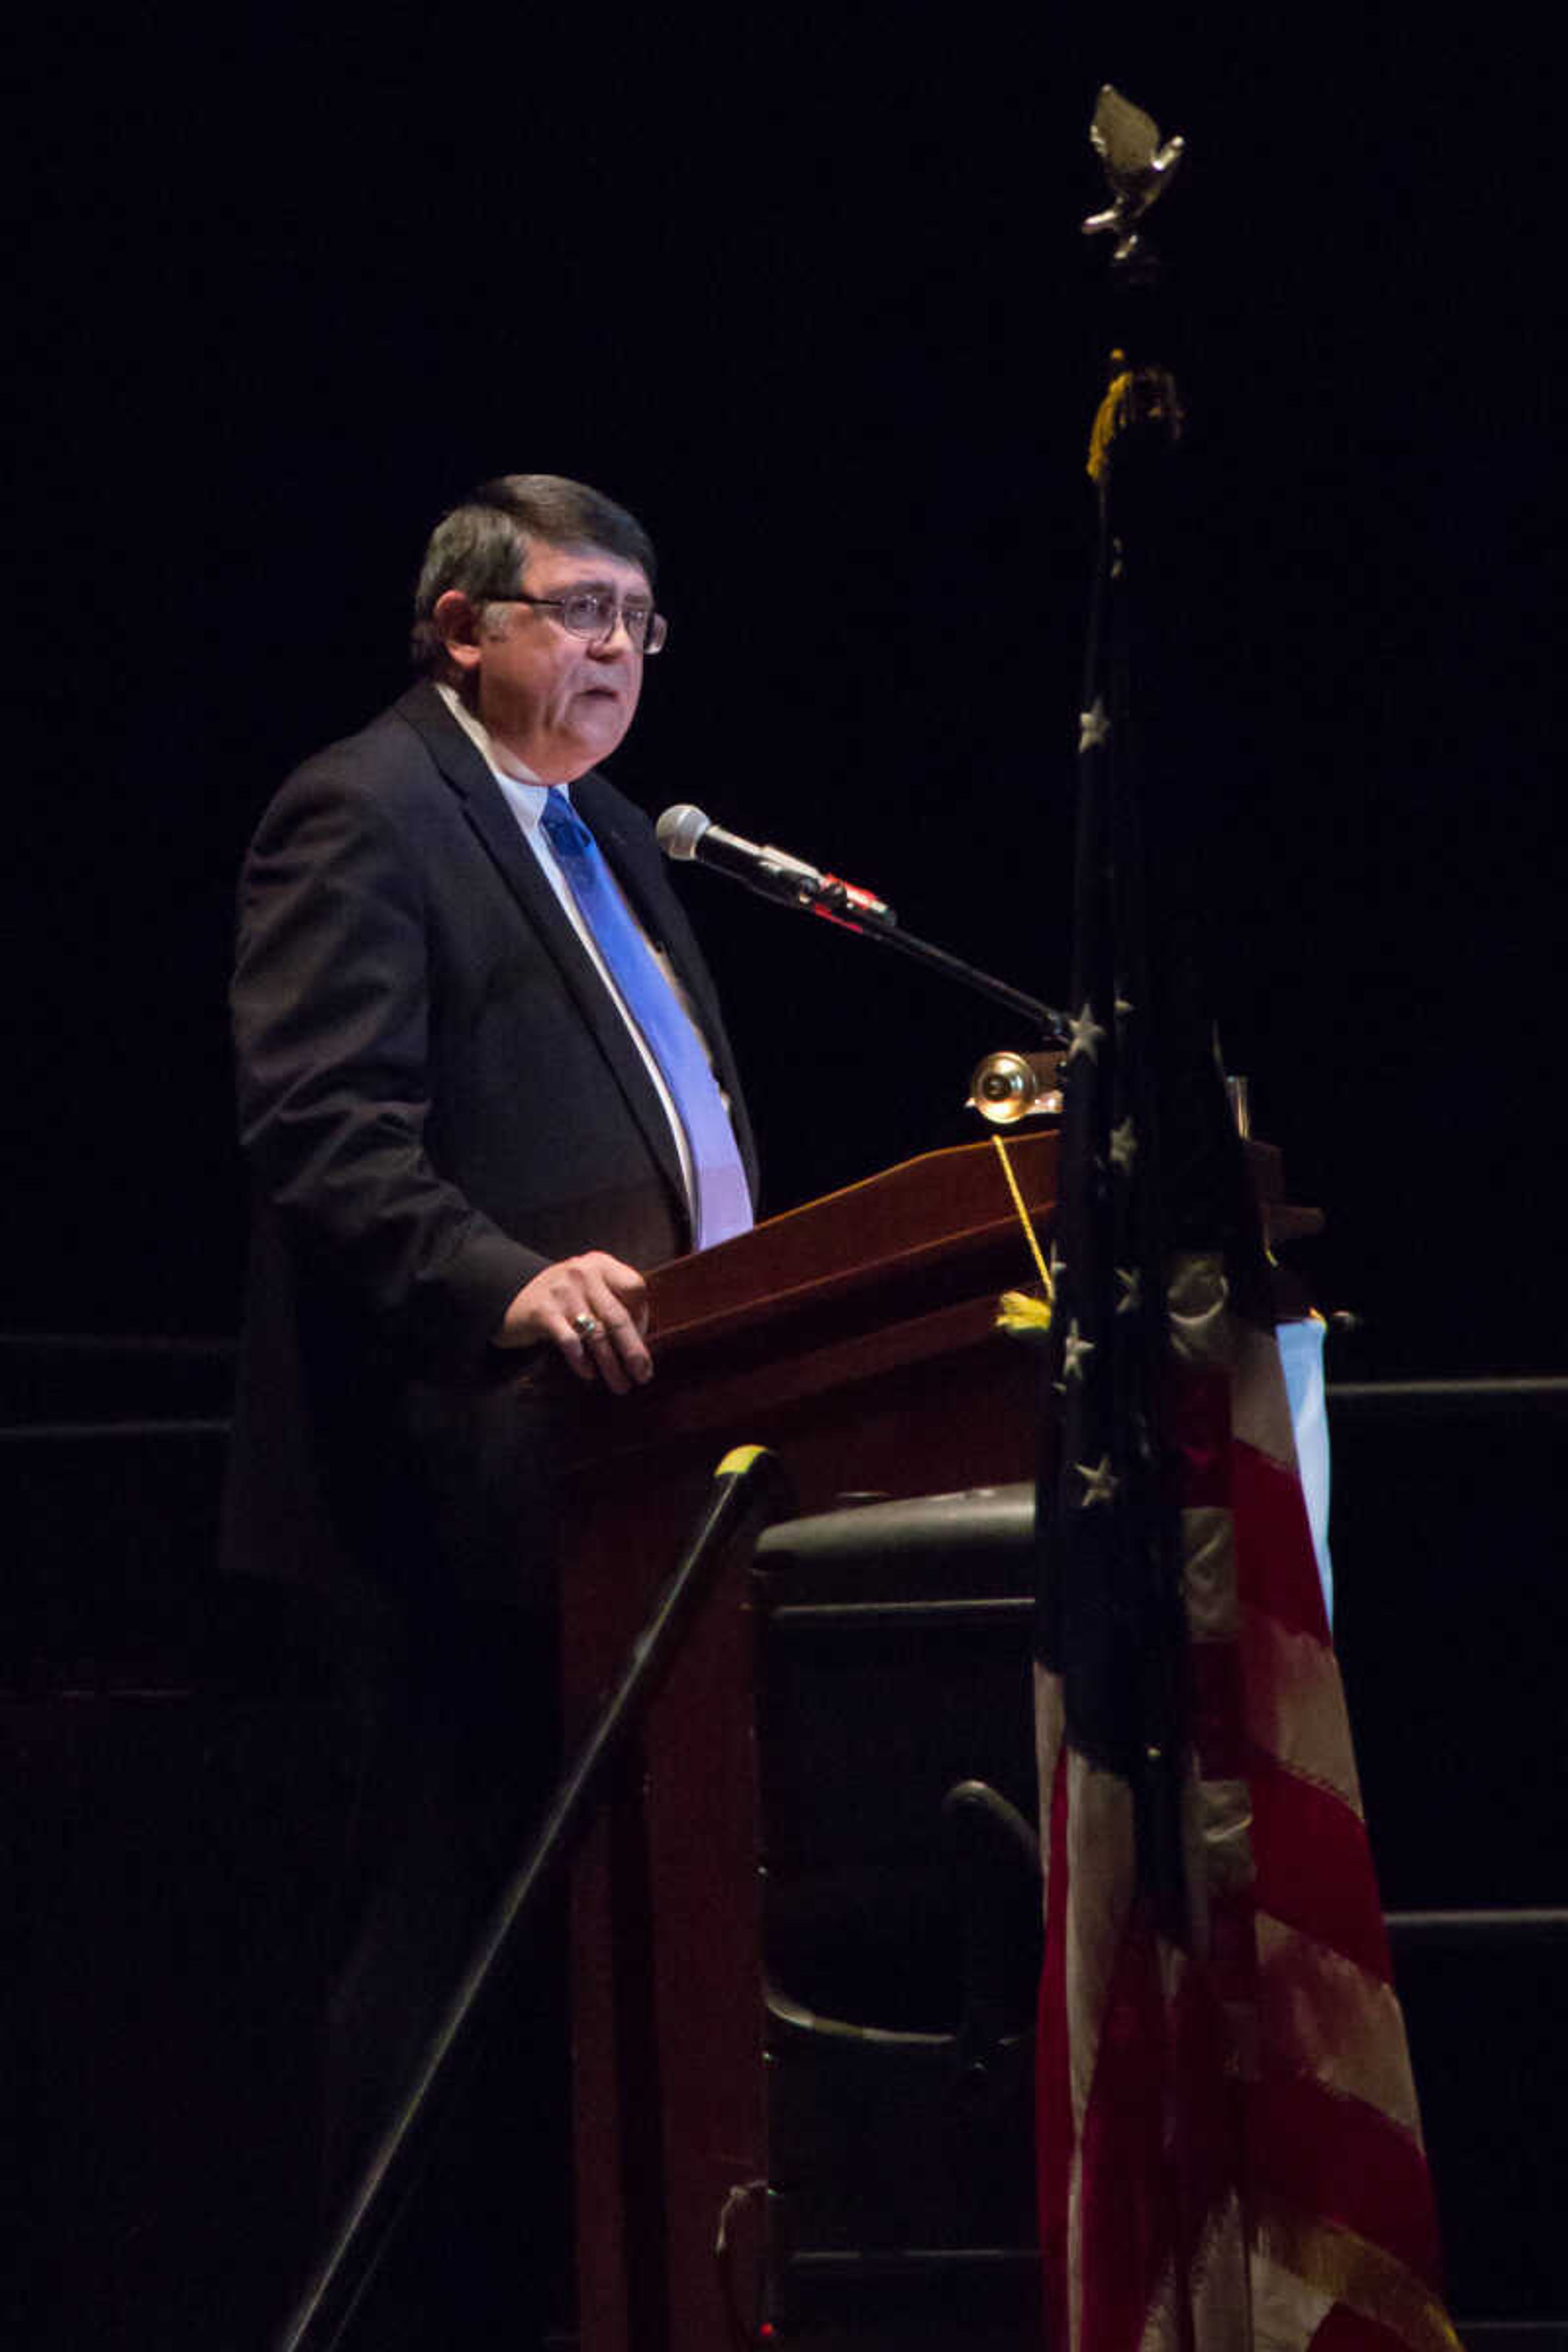 Southeast President Dr. Kenneth W. Dobbins announced Friday at the Cape Girardeau Chamber of Commerce's annual dinner that the university will add a Center for Excellence in Mass Media on Broadway. Photo by Zarah Laurence